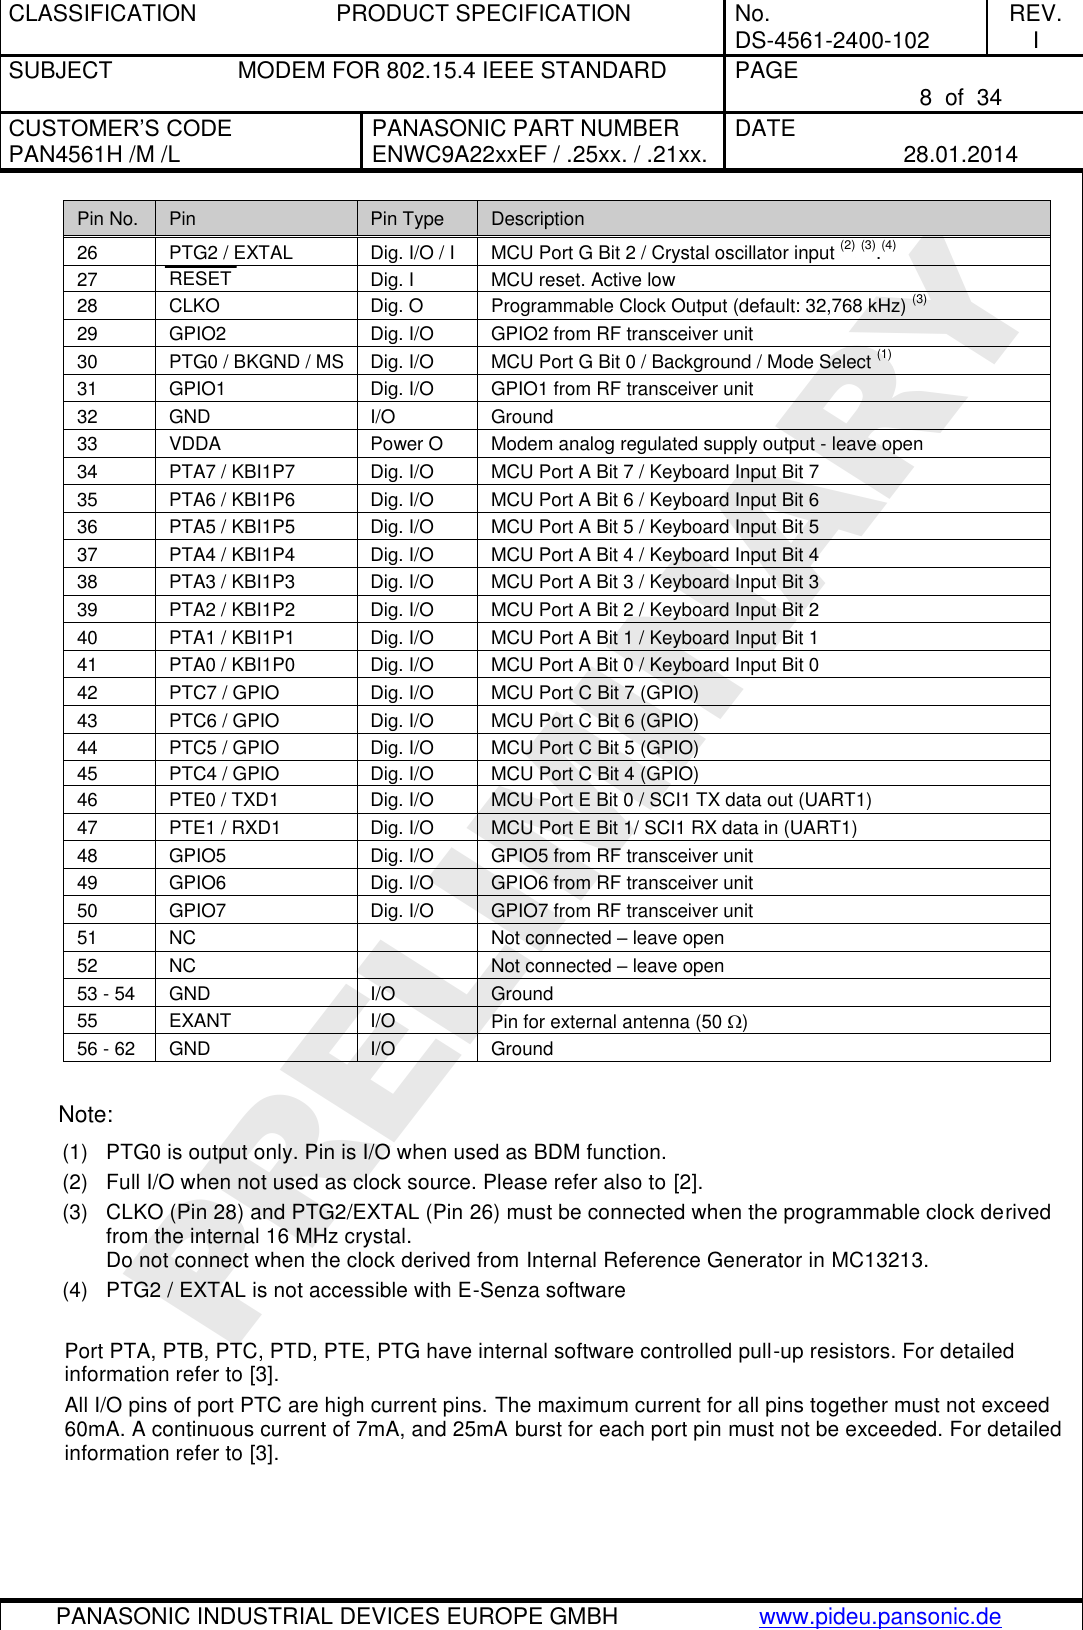 CLASSIFICATION  PRODUCT SPECIFICATION  No. DS-4561-2400-102 REV. I SUBJECT  MODEM FOR 802.15.4 IEEE STANDARD  PAGE   8  of  34 CUSTOMER’S CODE PAN4561H /M /L PANASONIC PART NUMBER ENWC9A22xxEF / .25xx. / .21xx. DATE   28.01.2014   PANASONIC INDUSTRIAL DEVICES EUROPE GMBH www.pideu.pansonic.de  PRELIMINARY Pin No. Pin Pin Type Description 26 PTG2 / EXTAL Dig. I/O / I MCU Port G Bit 2 / Crystal oscillator input P(2)P (3).(4)  27 RESET Dig. I MCU reset. Active low 28 CLKO Dig. O Programmable Clock Output (default: 32,768 kHz)P (3) 29 GPIO2 Dig. I/O GPIO2 from RF transceiver unit 30 PTG0 / BKGND / MS Dig. I/O MCU Port G Bit 0 / Background / Mode Select P(1)P 31 GPIO1 Dig. I/O GPIO1 from RF transceiver unit 32 GND I/O Ground 33 VDDA Power O Modem analog regulated supply output - leave open 34 PTA7 / KBI1P7 Dig. I/O MCU Port A Bit 7 / Keyboard Input Bit 7 35 PTA6 / KBI1P6 Dig. I/O MCU Port A Bit 6 / Keyboard Input Bit 6 36 PTA5 / KBI1P5 Dig. I/O MCU Port A Bit 5 / Keyboard Input Bit 5 37 PTA4 / KBI1P4 Dig. I/O MCU Port A Bit 4 / Keyboard Input Bit 4 38 PTA3 / KBI1P3 Dig. I/O MCU Port A Bit 3 / Keyboard Input Bit 3 39 PTA2 / KBI1P2 Dig. I/O MCU Port A Bit 2 / Keyboard Input Bit 2 40 PTA1 / KBI1P1 Dig. I/O MCU Port A Bit 1 / Keyboard Input Bit 1 41 PTA0 / KBI1P0 Dig. I/O MCU Port A Bit 0 / Keyboard Input Bit 0 42 PTC7 / GPIO Dig. I/O MCU Port C Bit 7 (GPIO) 43 PTC6 / GPIO Dig. I/O MCU Port C Bit 6 (GPIO) 44 PTC5 / GPIO Dig. I/O MCU Port C Bit 5 (GPIO) 45 PTC4 / GPIO Dig. I/O MCU Port C Bit 4 (GPIO) 46 PTE0 / TXD1 Dig. I/O MCU Port E Bit 0 / SCI1 TX data out (UART1) 47 PTE1 / RXD1 Dig. I/O MCU Port E Bit 1/ SCI1 RX data in (UART1) 48 GPIO5 Dig. I/O GPIO5 from RF transceiver unit 49 GPIO6 Dig. I/O GPIO6 from RF transceiver unit 50 GPIO7 Dig. I/O GPIO7 from RF transceiver unit 51 NC  Not connected – leave open 52 NC  Not connected – leave open 53 - 54 GND I/O Ground 55 EXANT I/O Pin for external antenna (50 ) 56 - 62 GND I/O Ground  Note: (1)  PTG0 is output only. Pin is I/O when used as BDM function. (2)  Full I/O when not used as clock source. Please refer also to [2]. (3)  CLKO (Pin 28) and PTG2/EXTAL (Pin 26) must be connected when the programmable clock derived from the internal 16 MHz crystal. Do not connect when the clock derived from Internal Reference Generator in MC13213. (4)  PTG2 / EXTAL is not accessible with E-Senza software  Port PTA, PTB, PTC, PTD, PTE, PTG have internal software controlled pull-up resistors. For detailed information refer to [3]. All I/O pins of port PTC are high current pins. The maximum current for all pins together must not exceed 60mA. A continuous current of 7mA, and 25mA burst for each port pin must not be exceeded. For detailed information refer to [3]. 